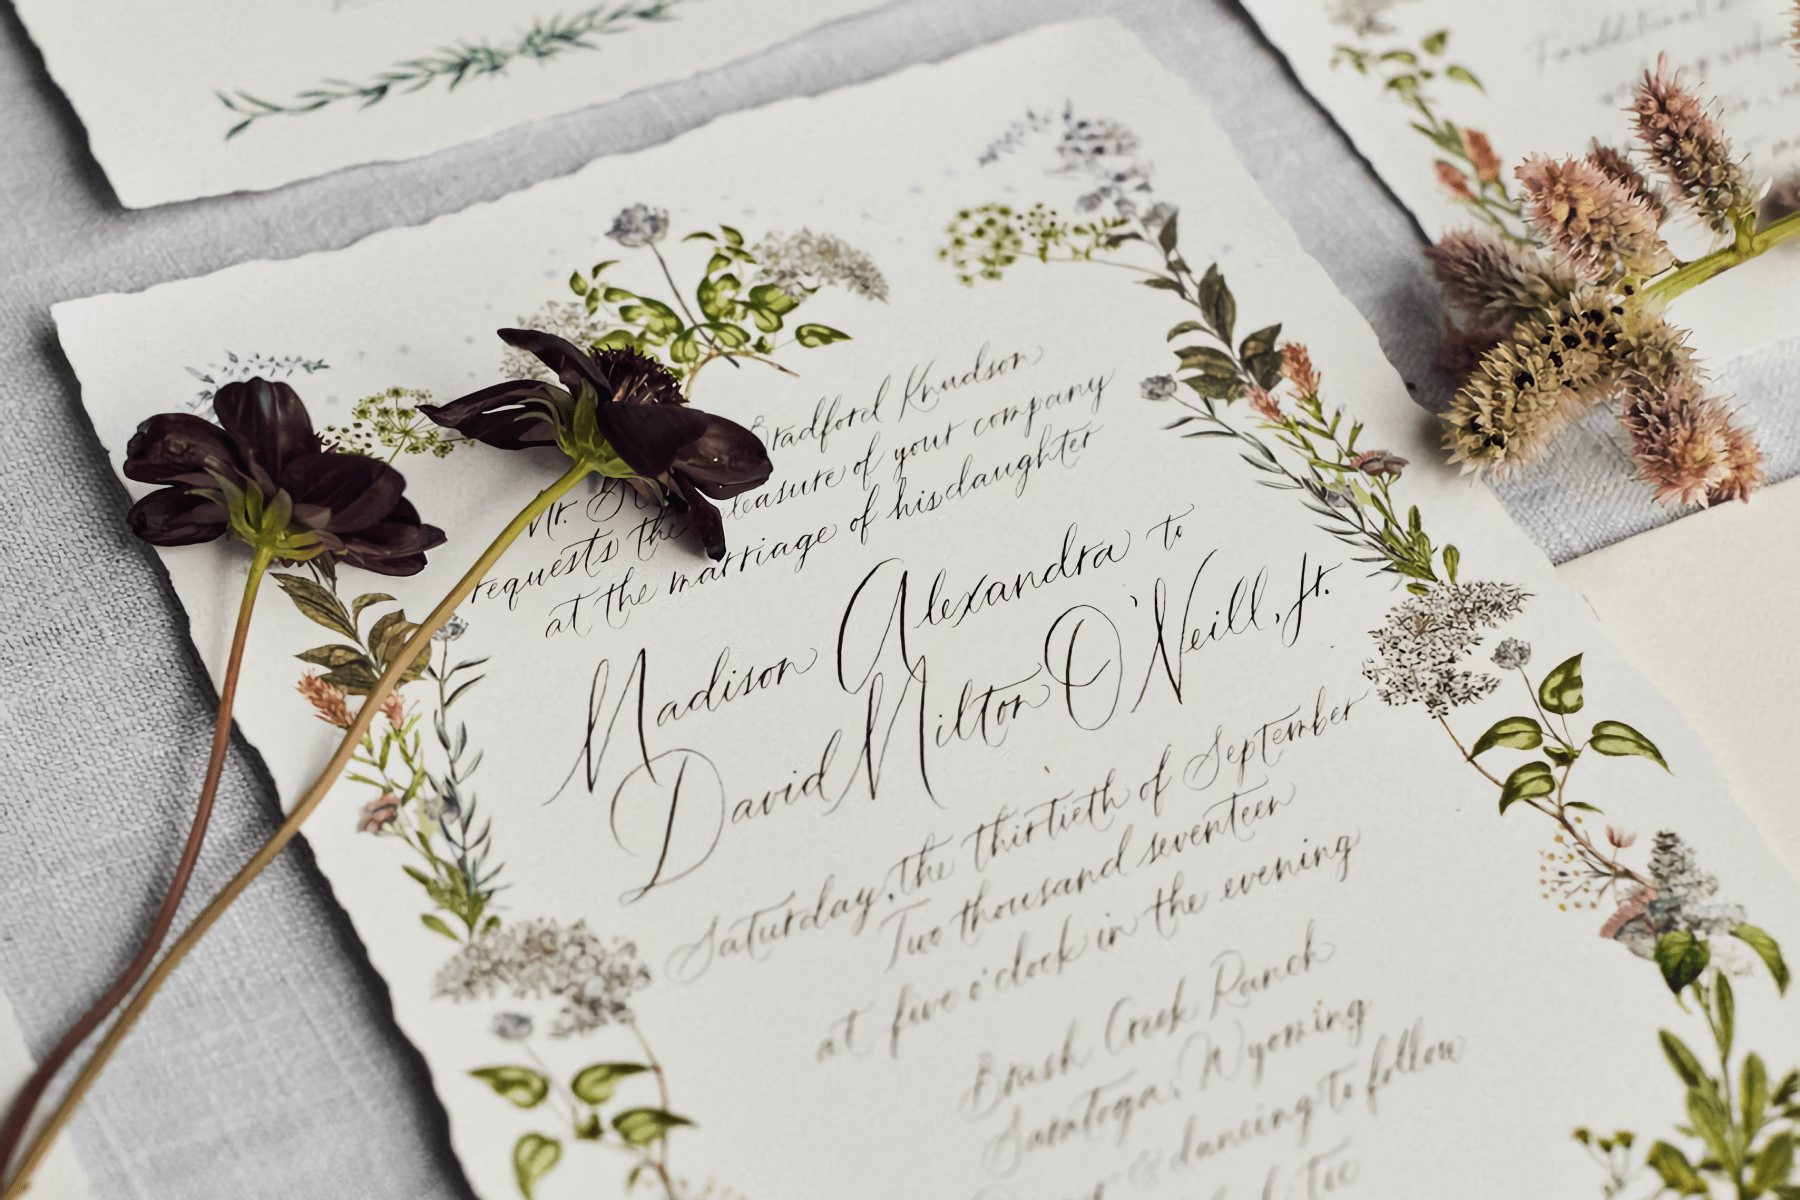 A wedding invitation with organic edges, a delicate floral border, and hand-written calligraphy, with small flowers laid on top.